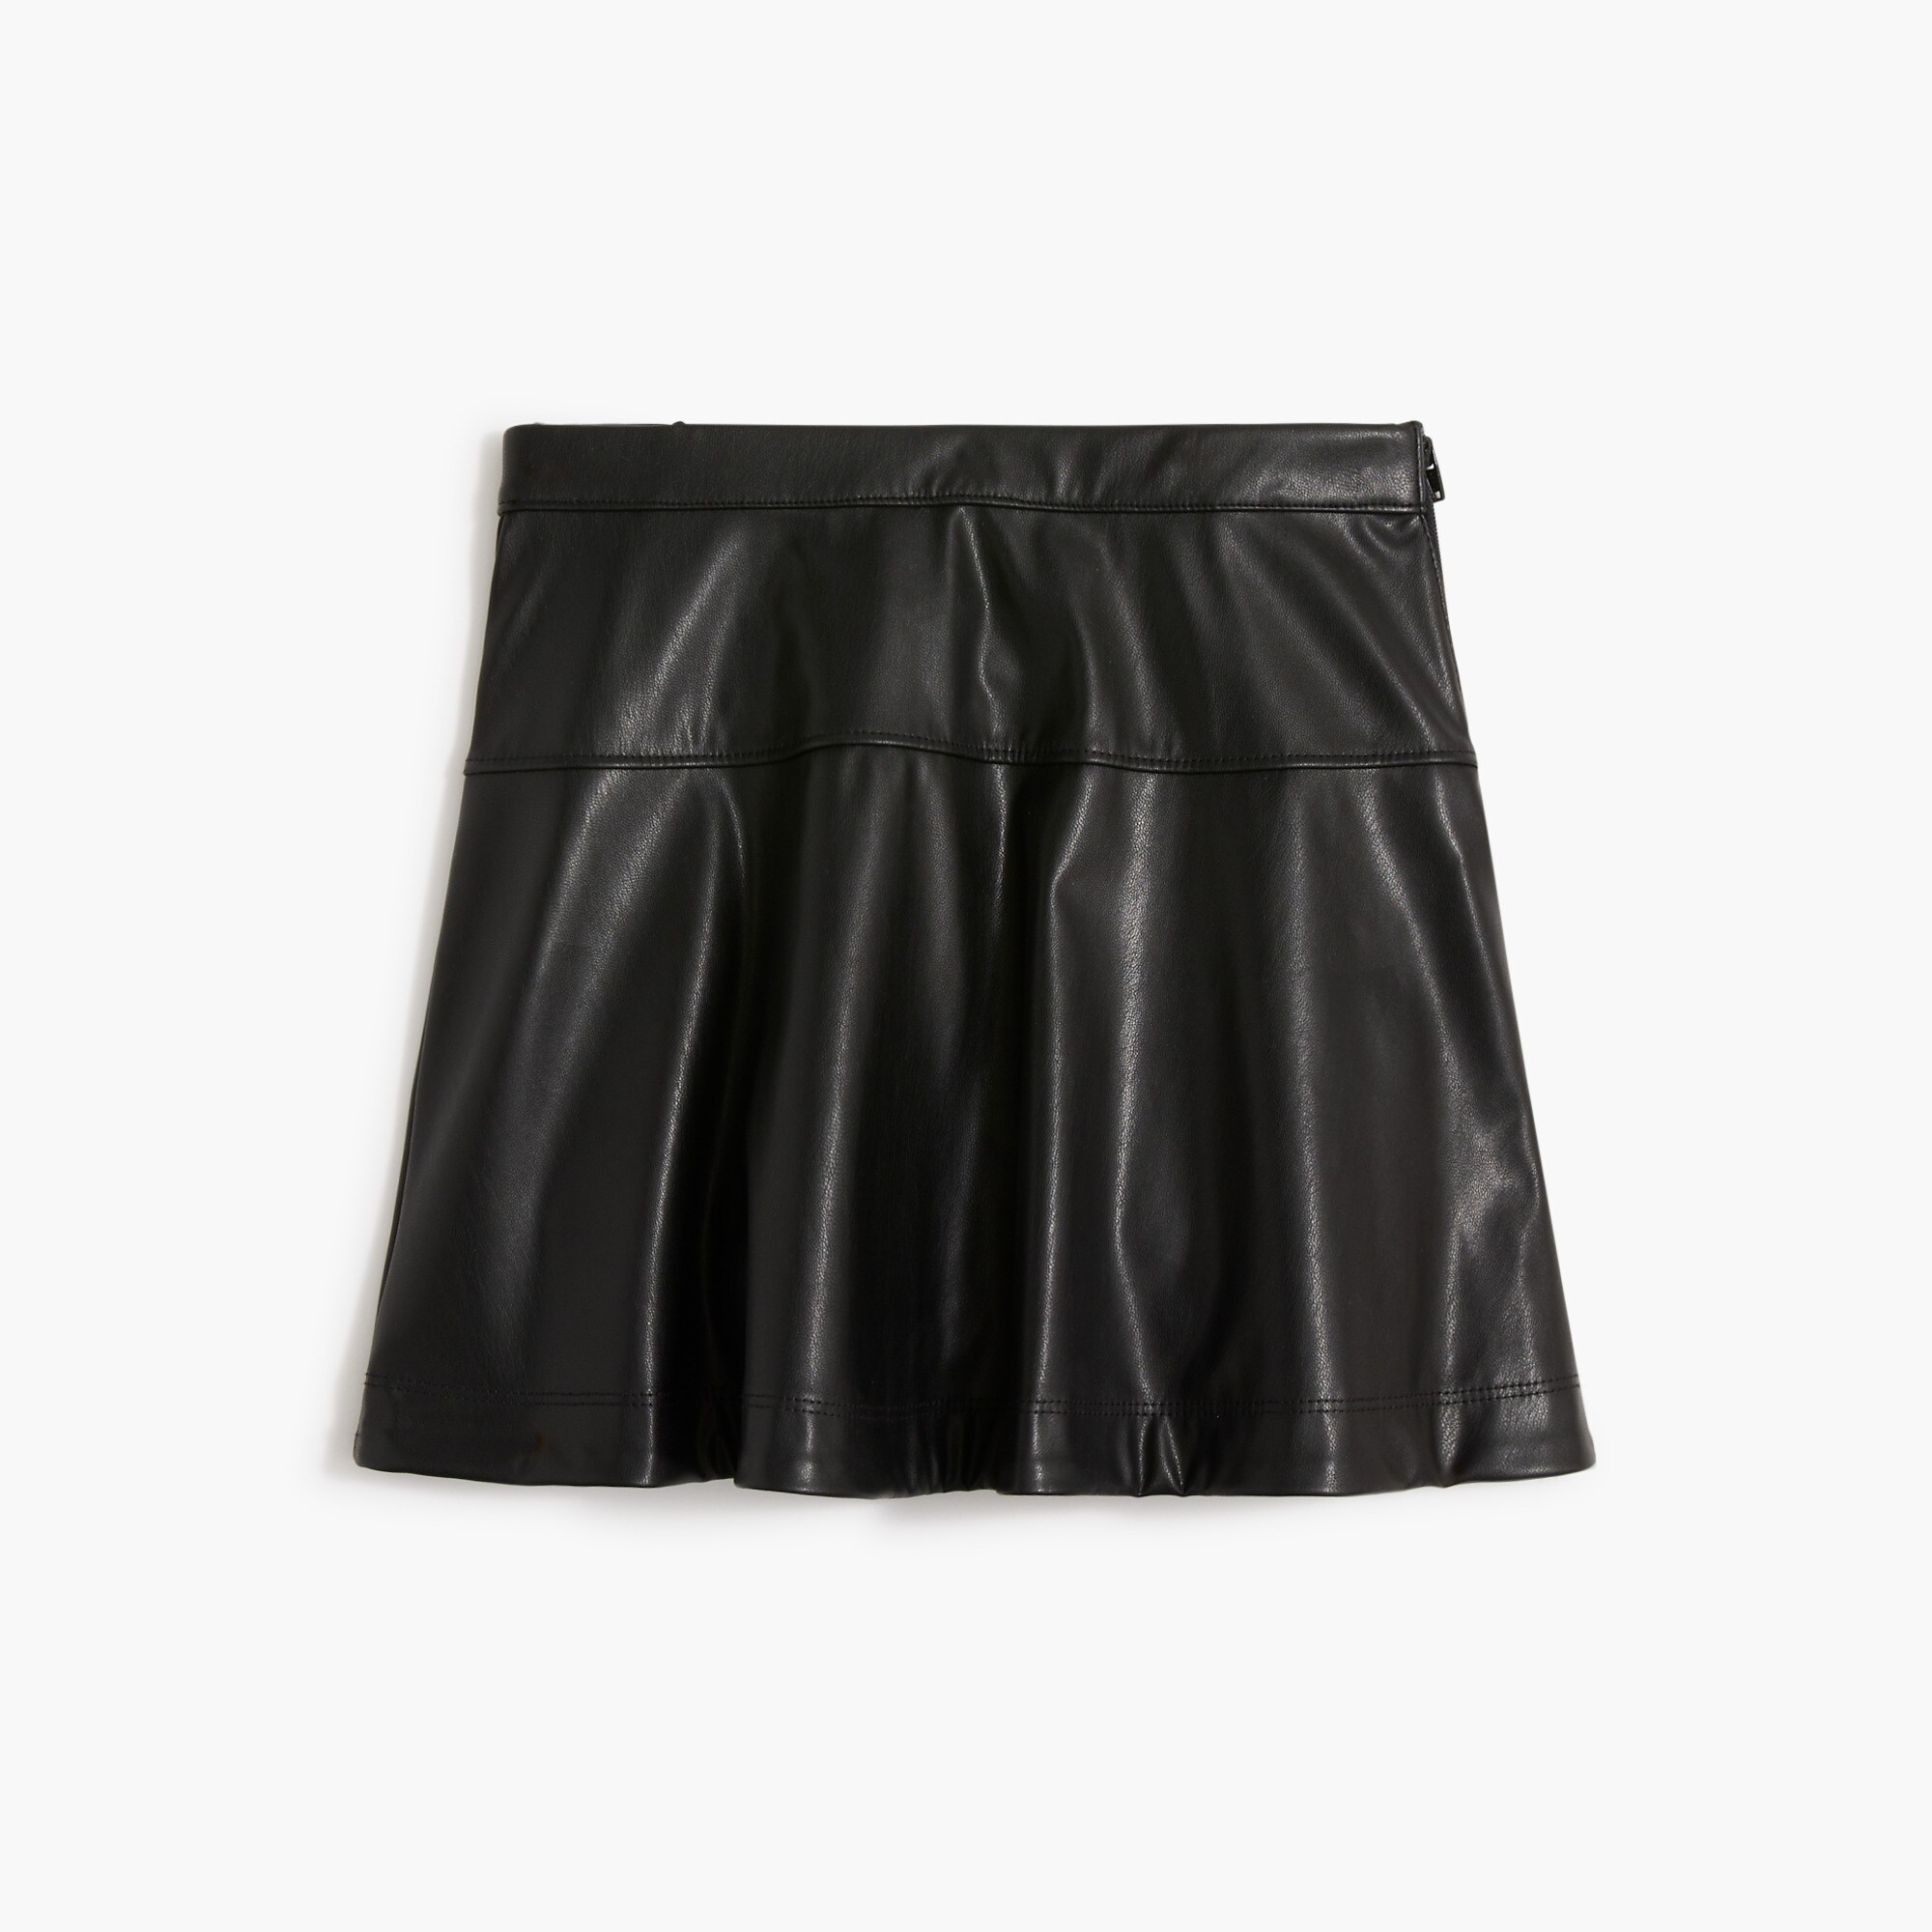  Girls' faux-leather skirt